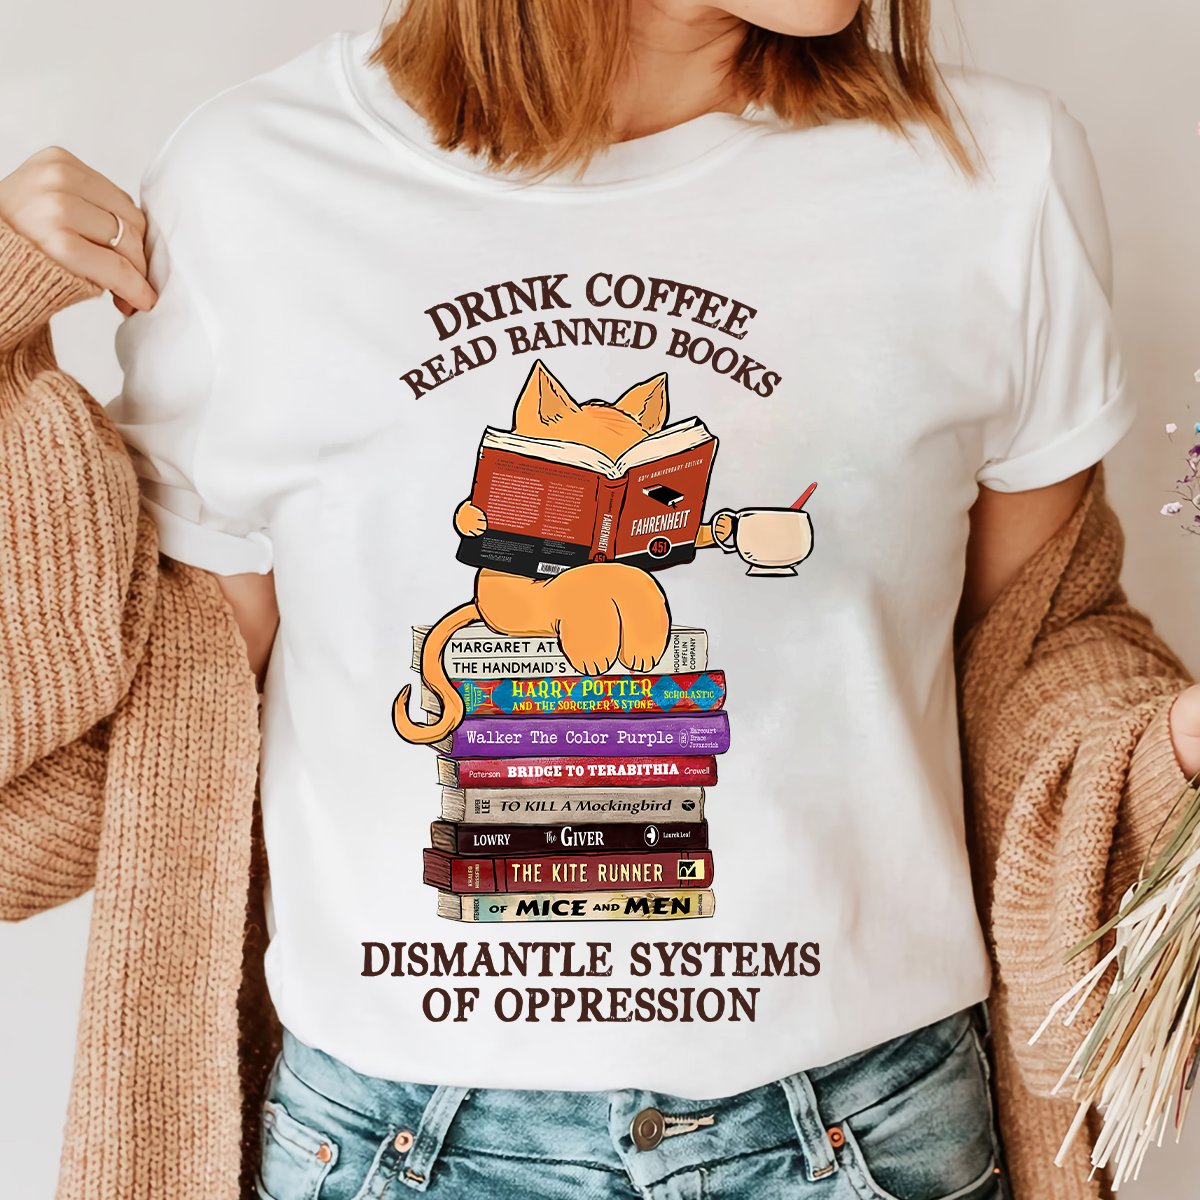 Books, brews, and breaking chains! Unleash your intellect and ignite change! 🐱📖✨ Order here: propertee.space/drink-coffee-r…